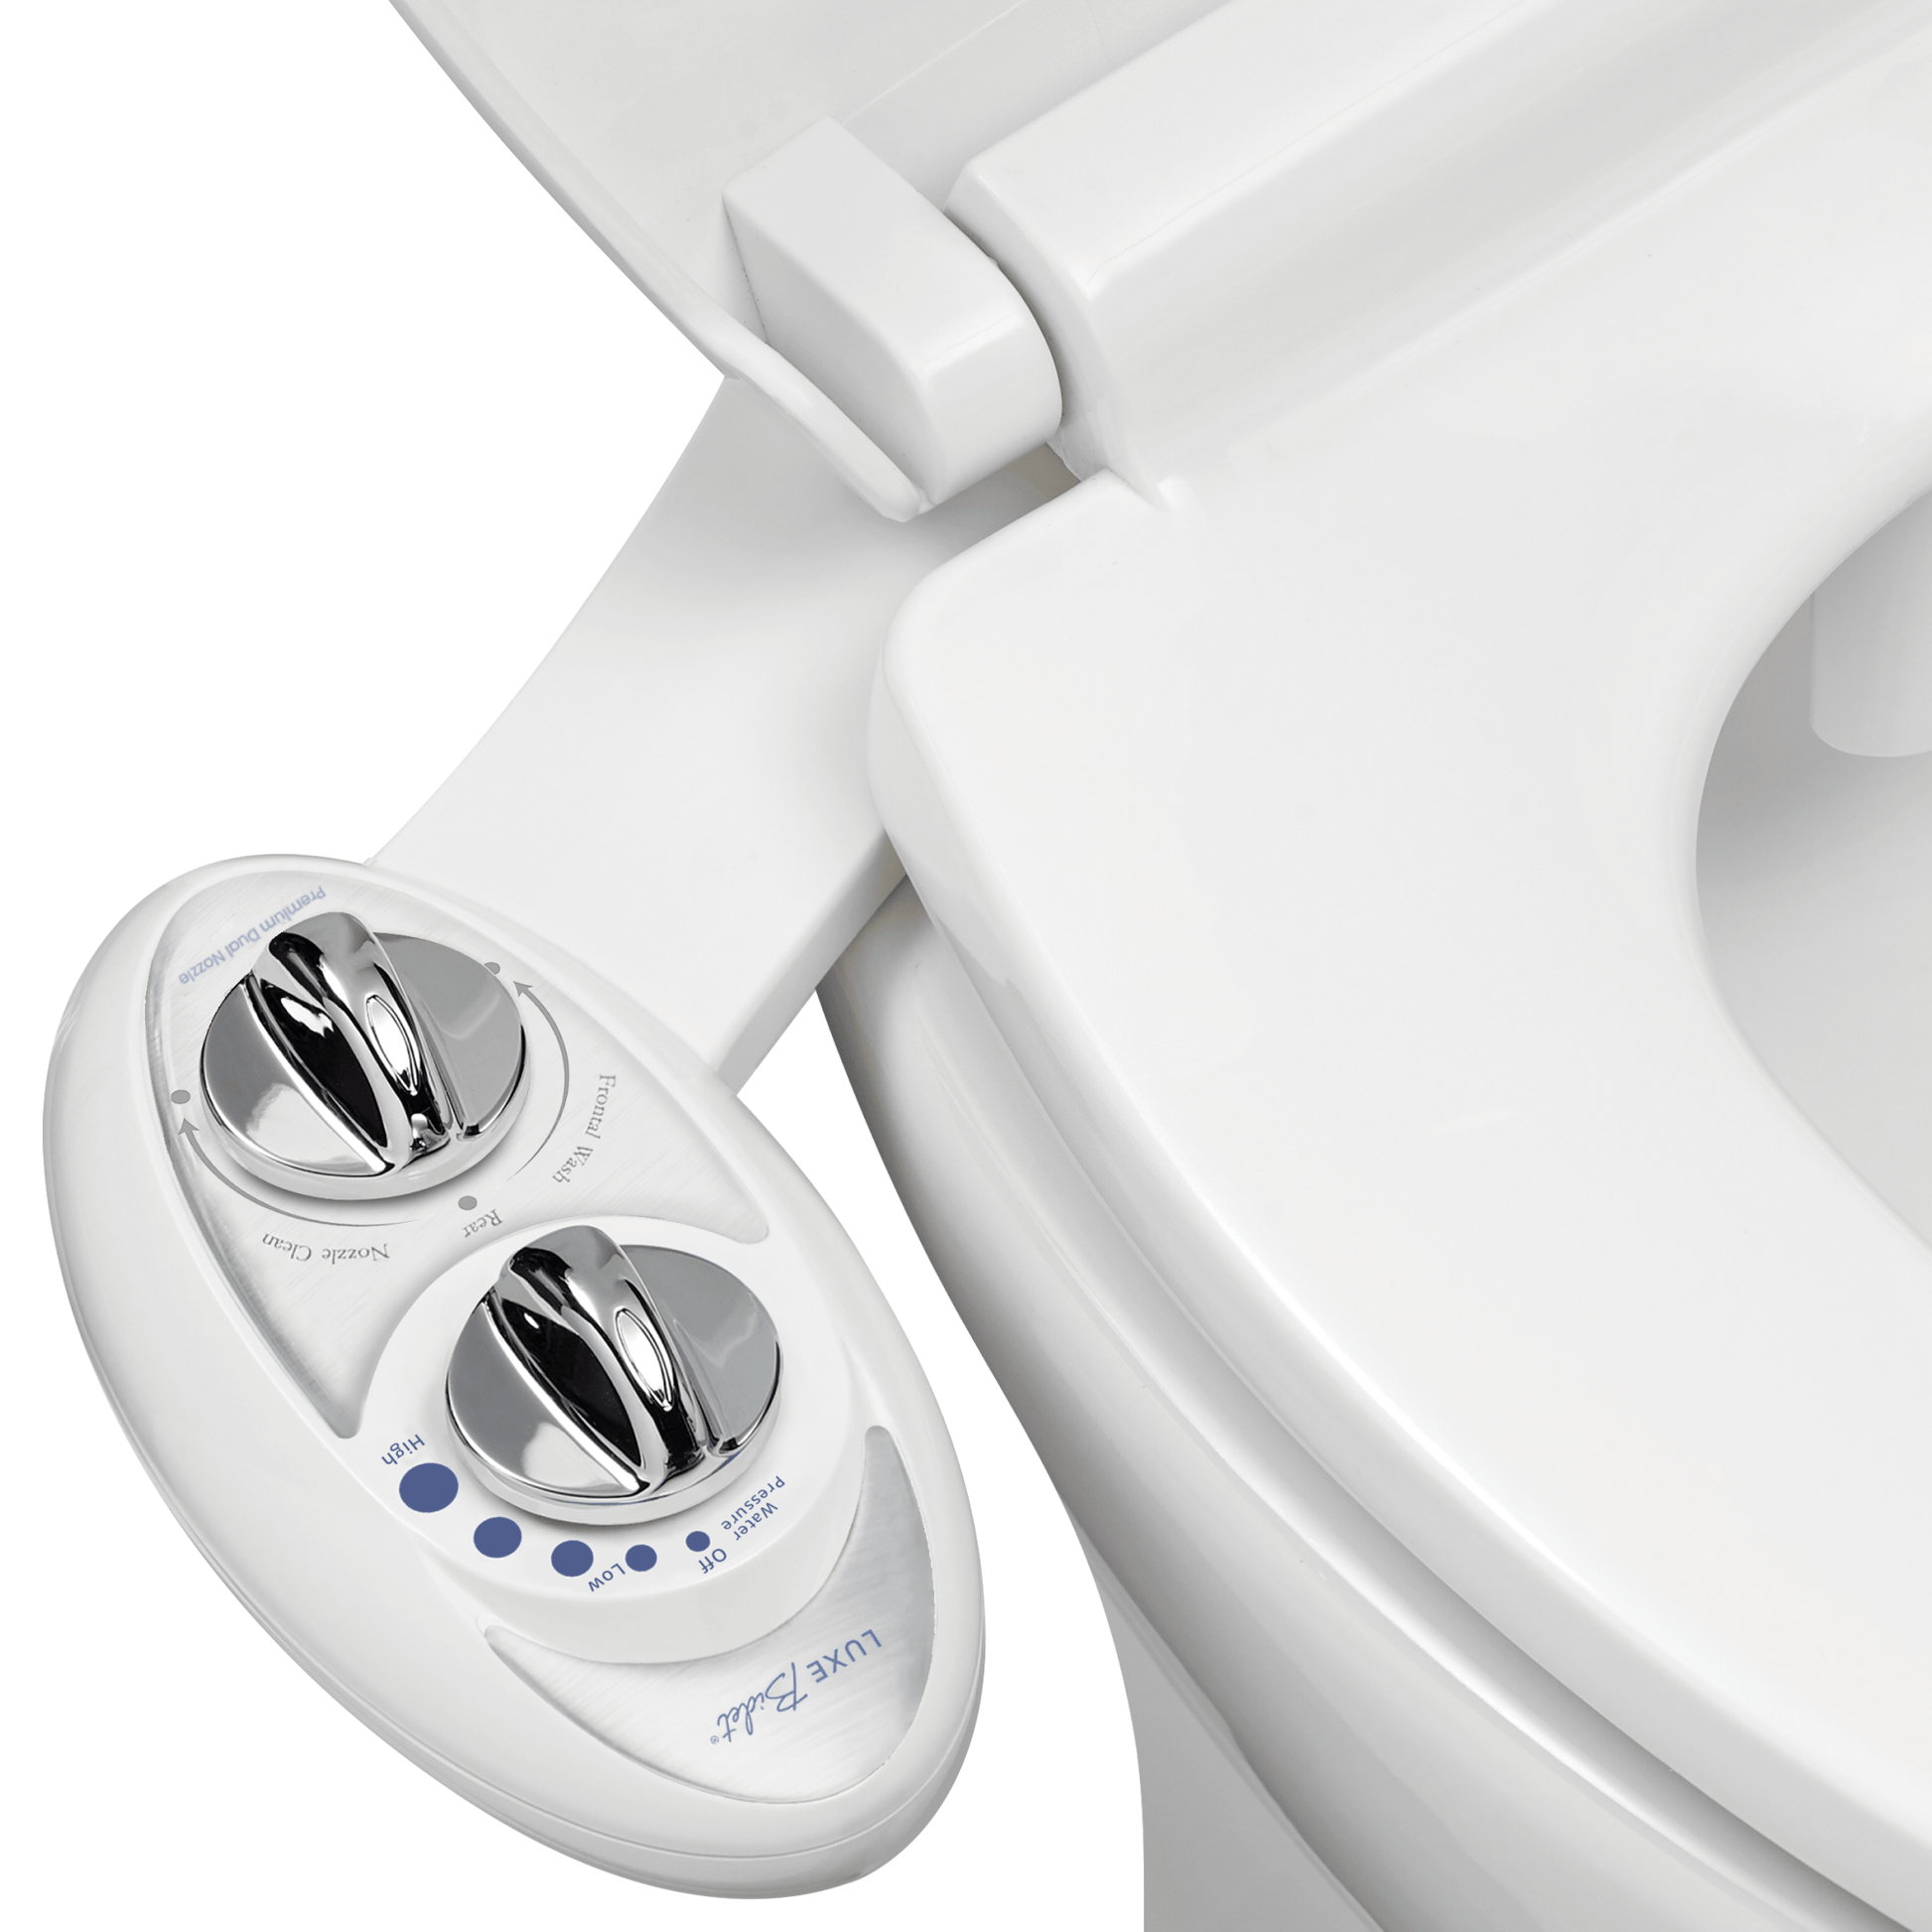 NEO 185 - The Best Selling Dual Nozzle & Self-Cleaning Bidet Attachment –  LUXE Bidet